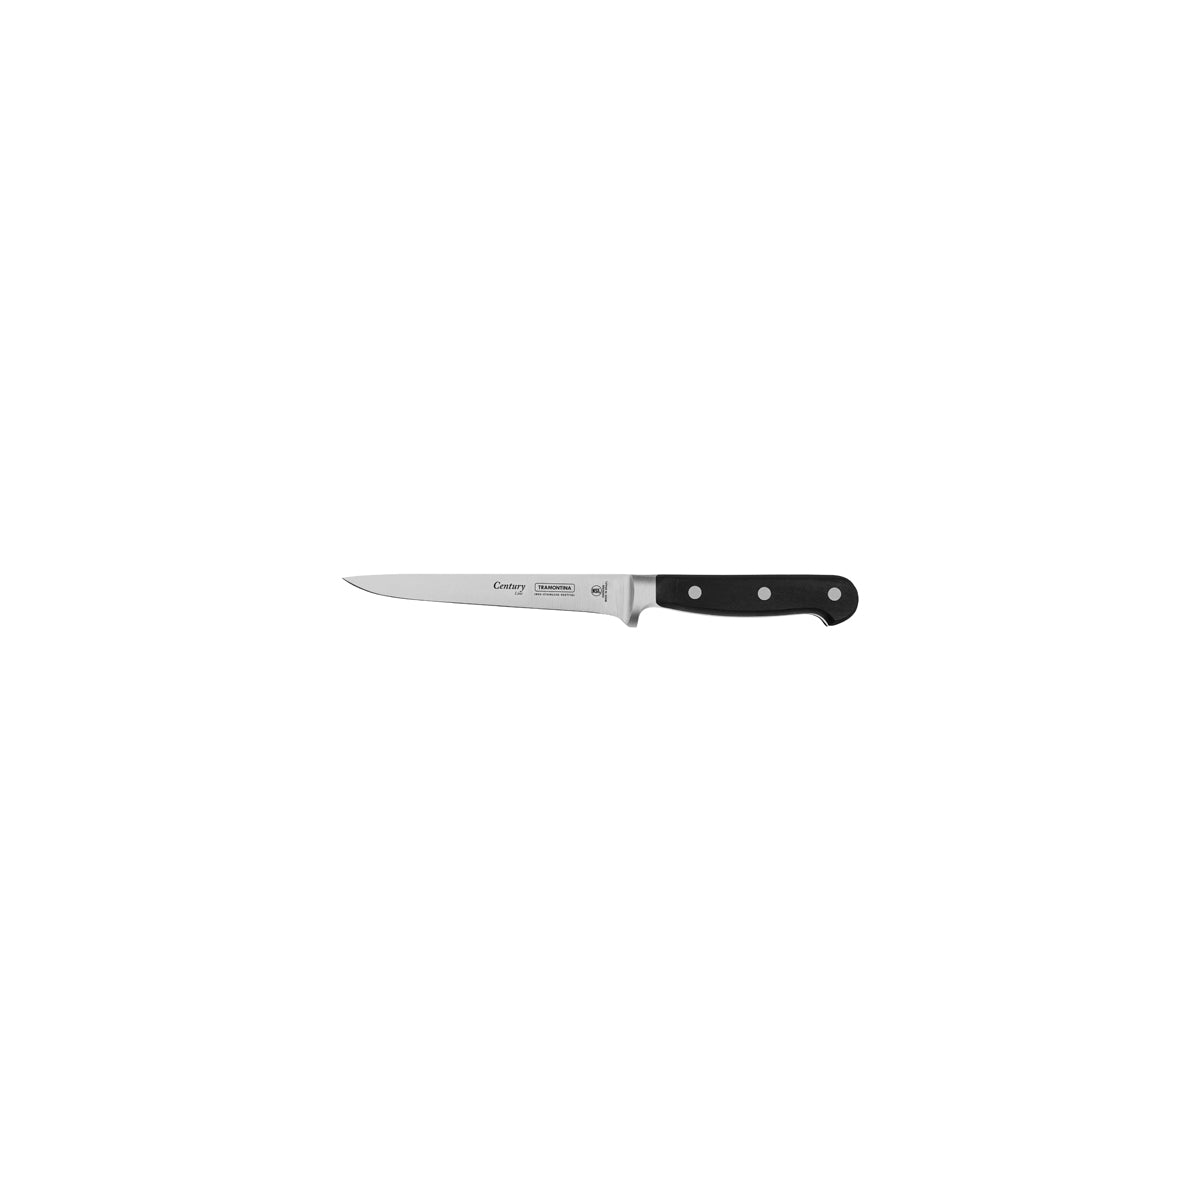 TM24006/006 Tramontina Century Boning Knife Curved Narrow Blade with Forged Handle Black 152mm Tomkin Australia Hospitality Supplies